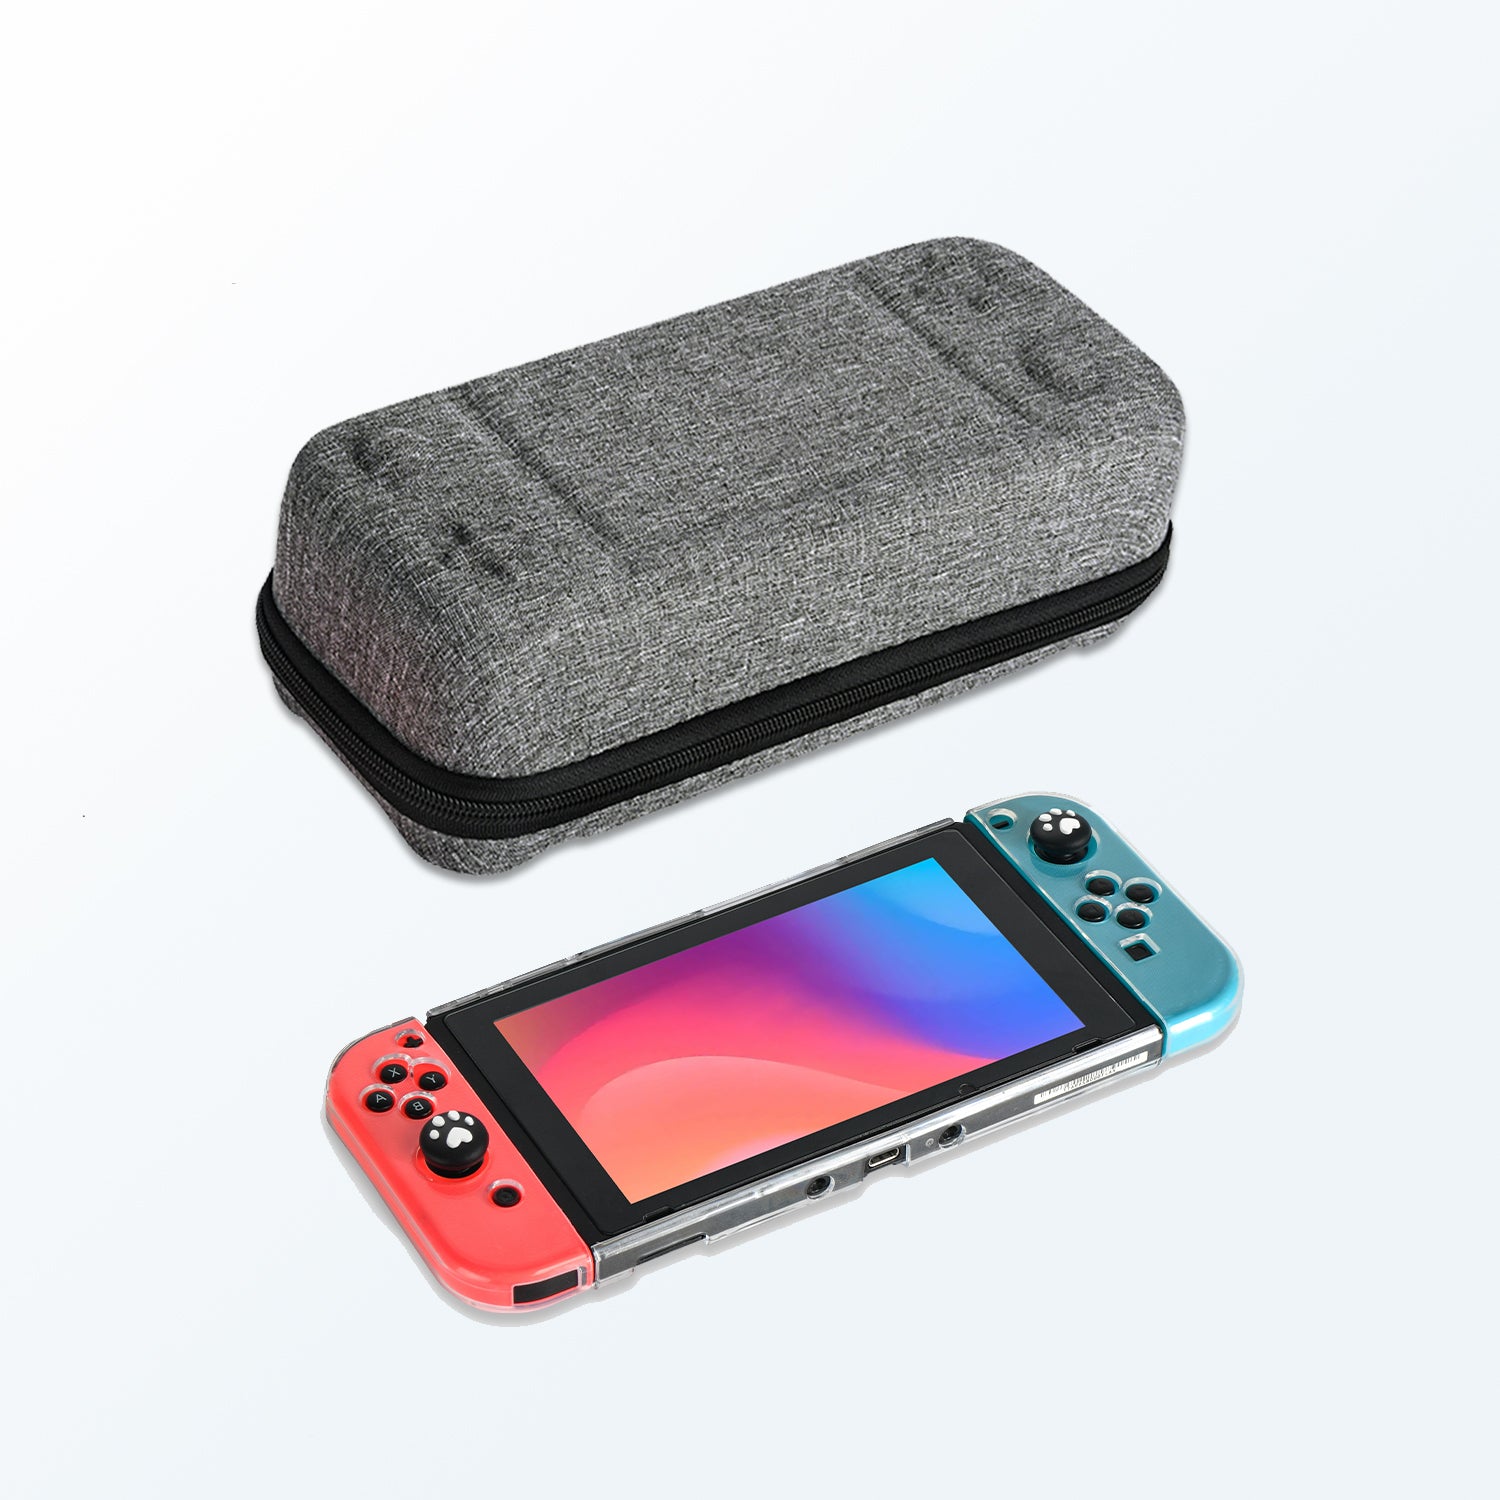 Younik Button Design Nintendo Switch Bag, Carrying Bag for NS Switch